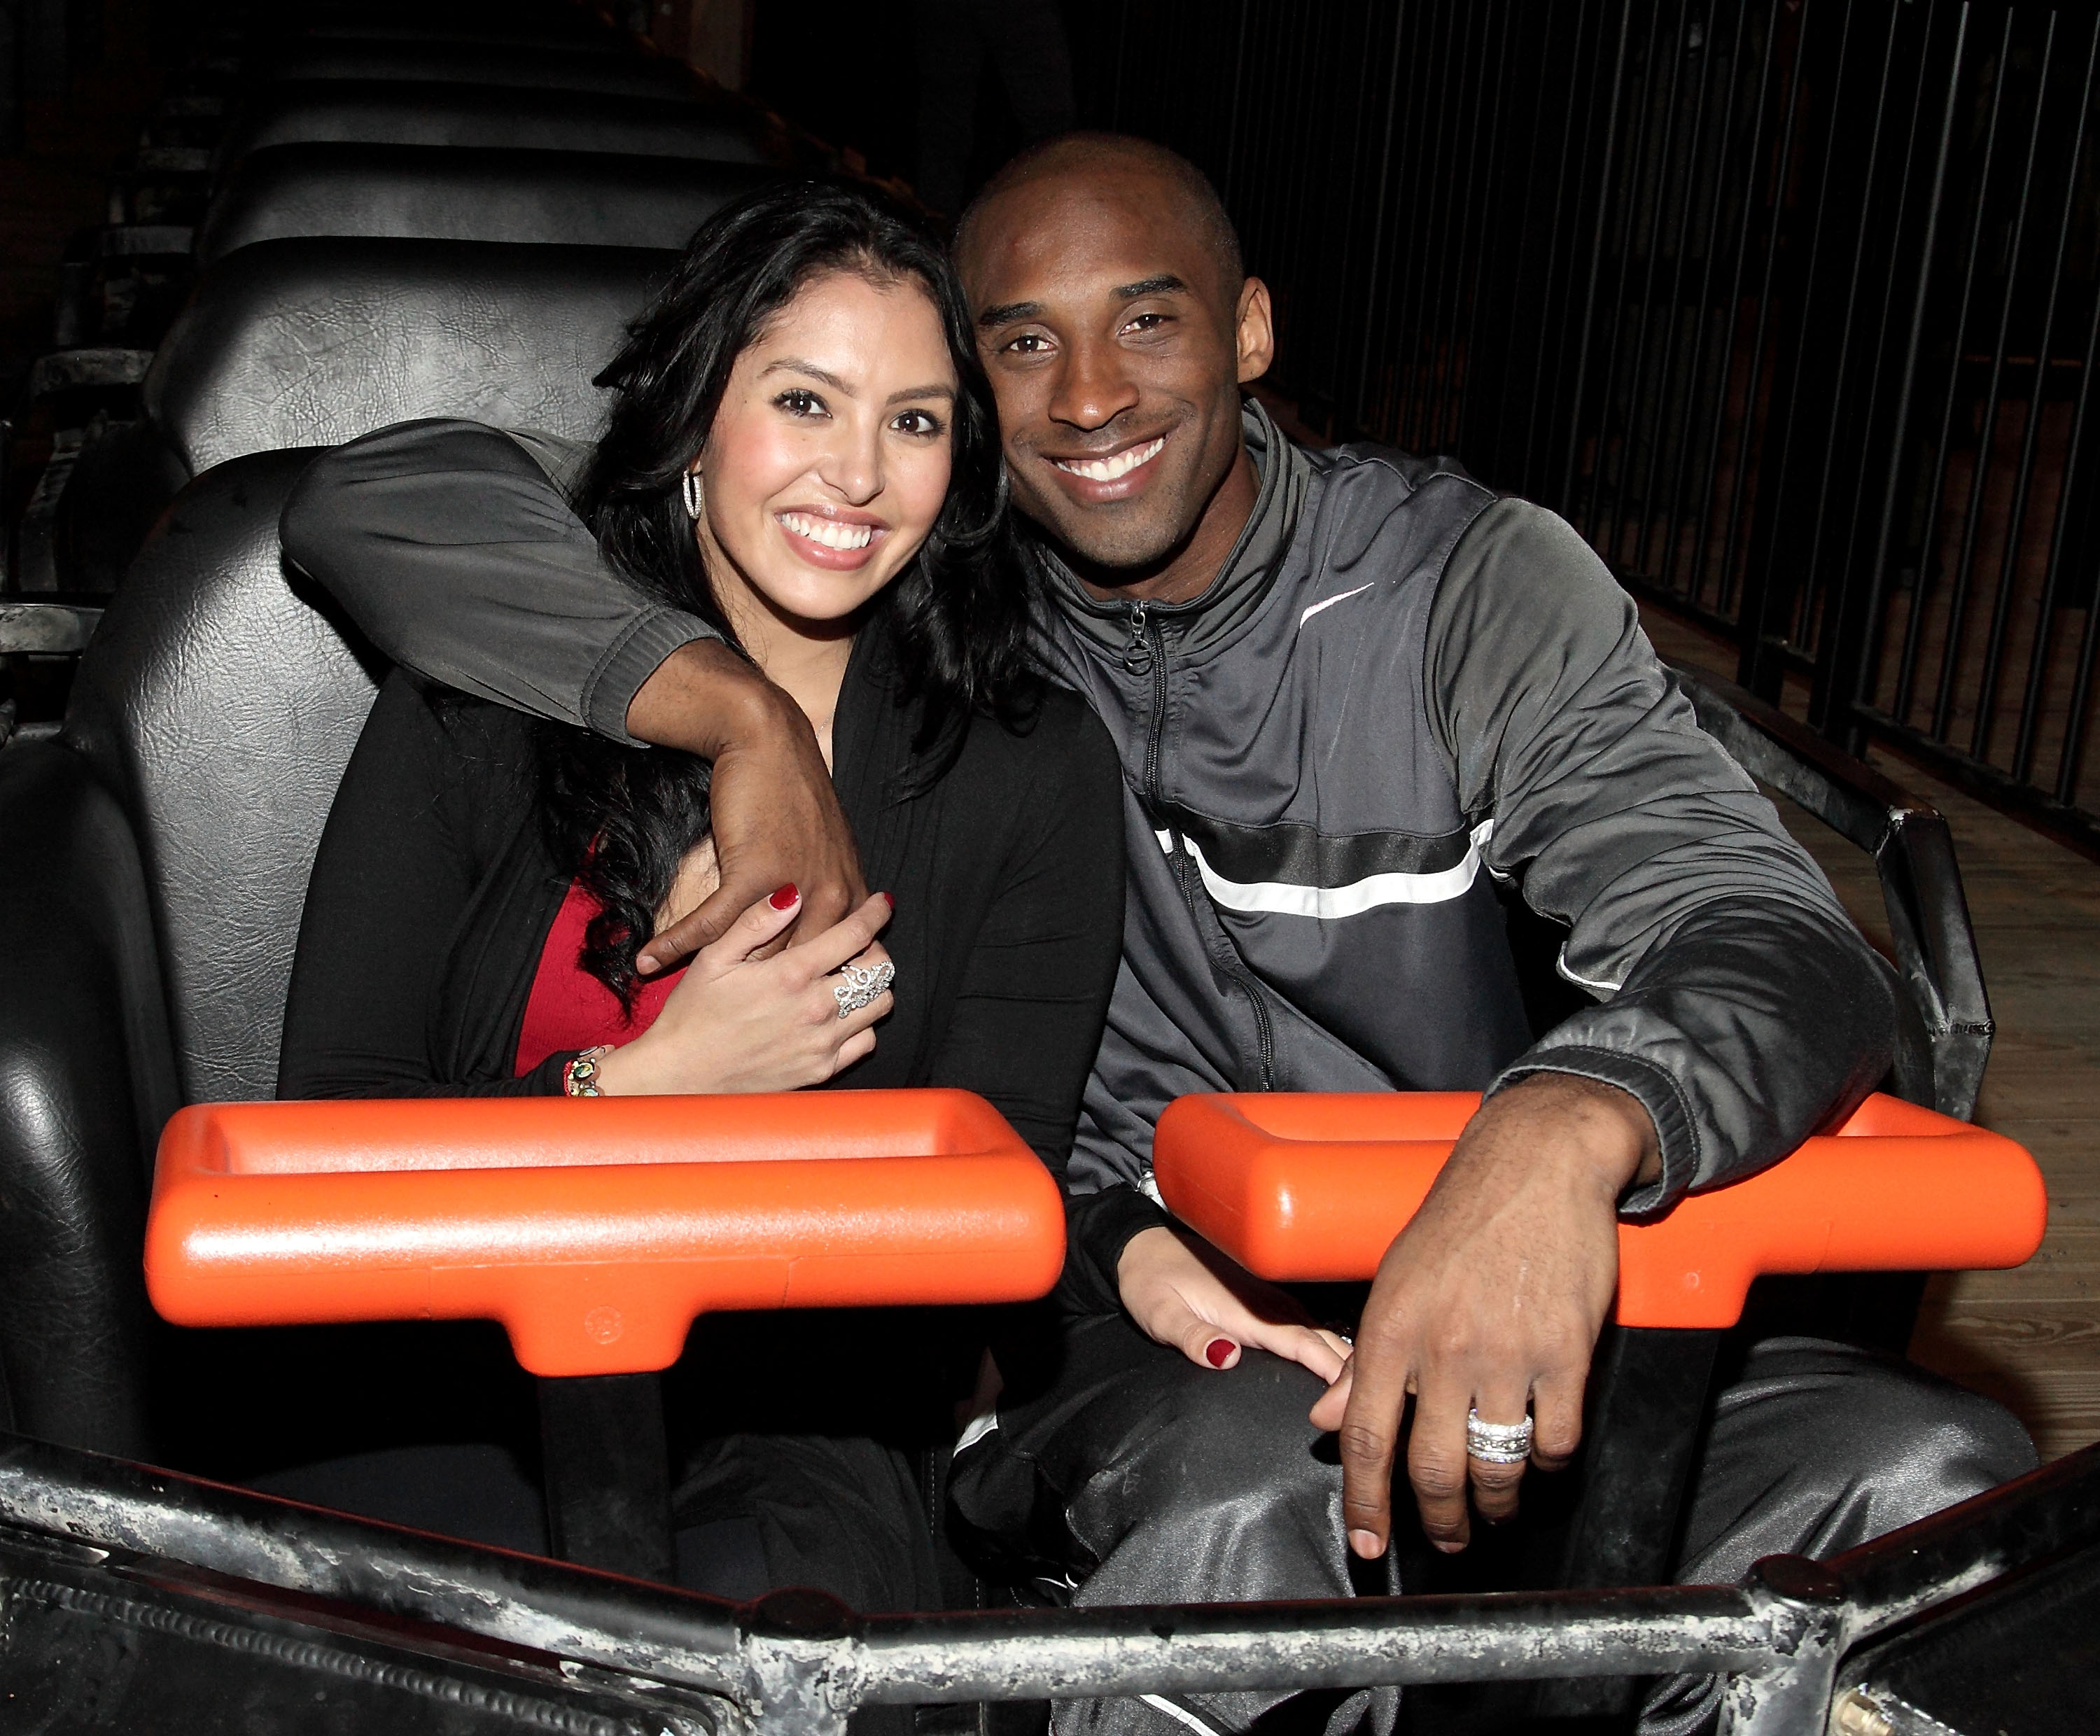 Kobe Bryant and Vanessa Bryant on Terminator Salvation - The Ride at Six Flags Magic Mountain